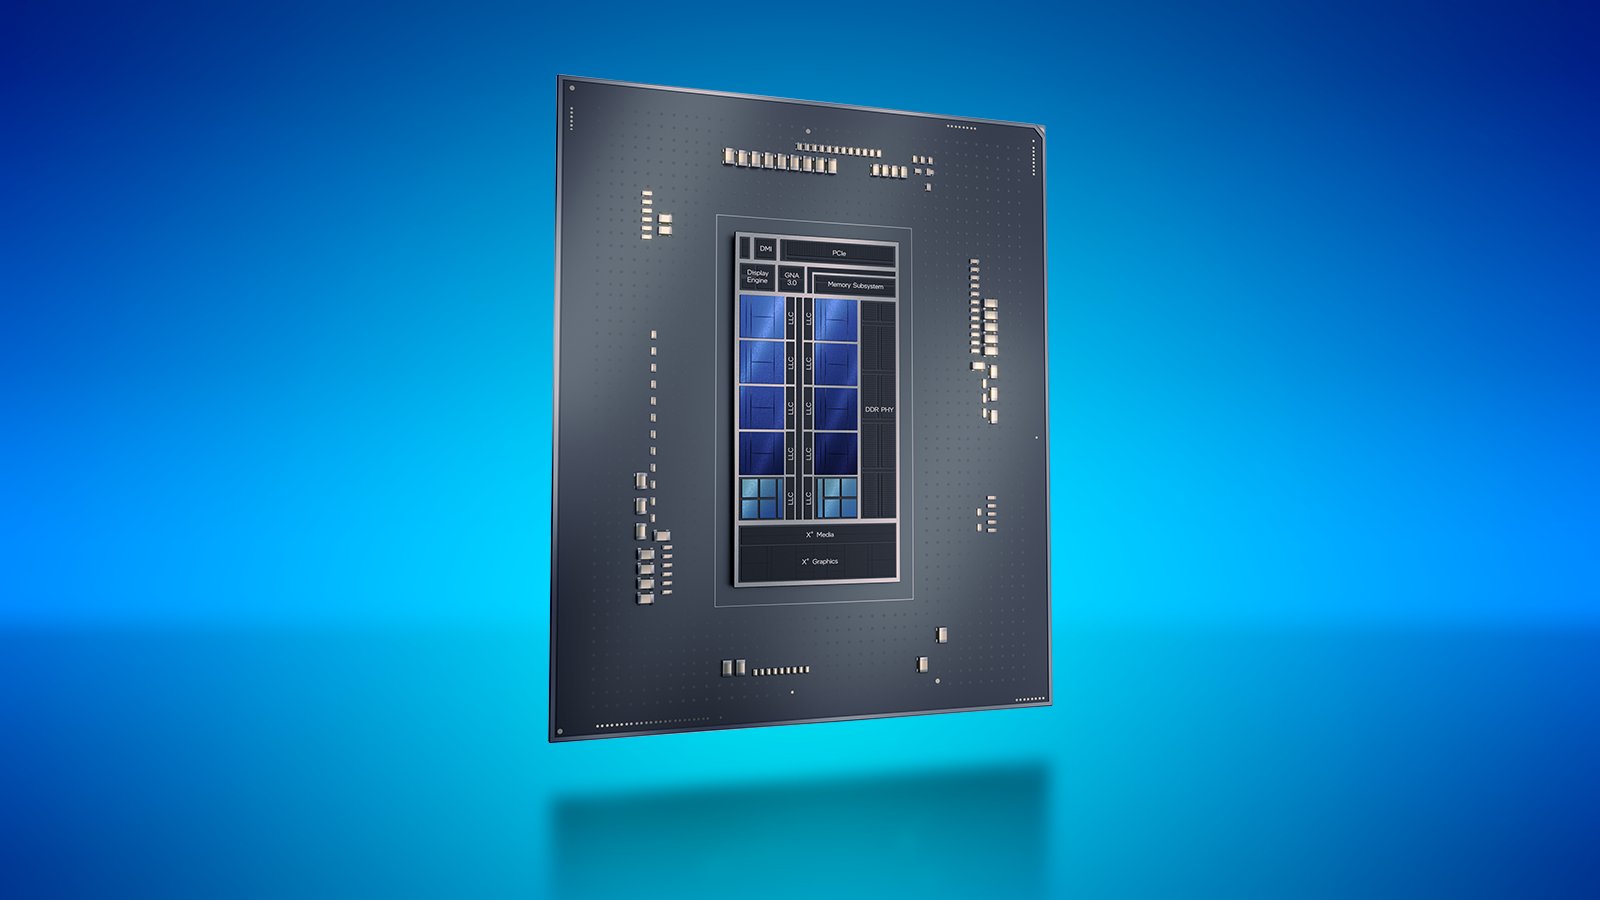 Intel Alder Lake Core i9 chipset leaks online with expected price and specification sheet